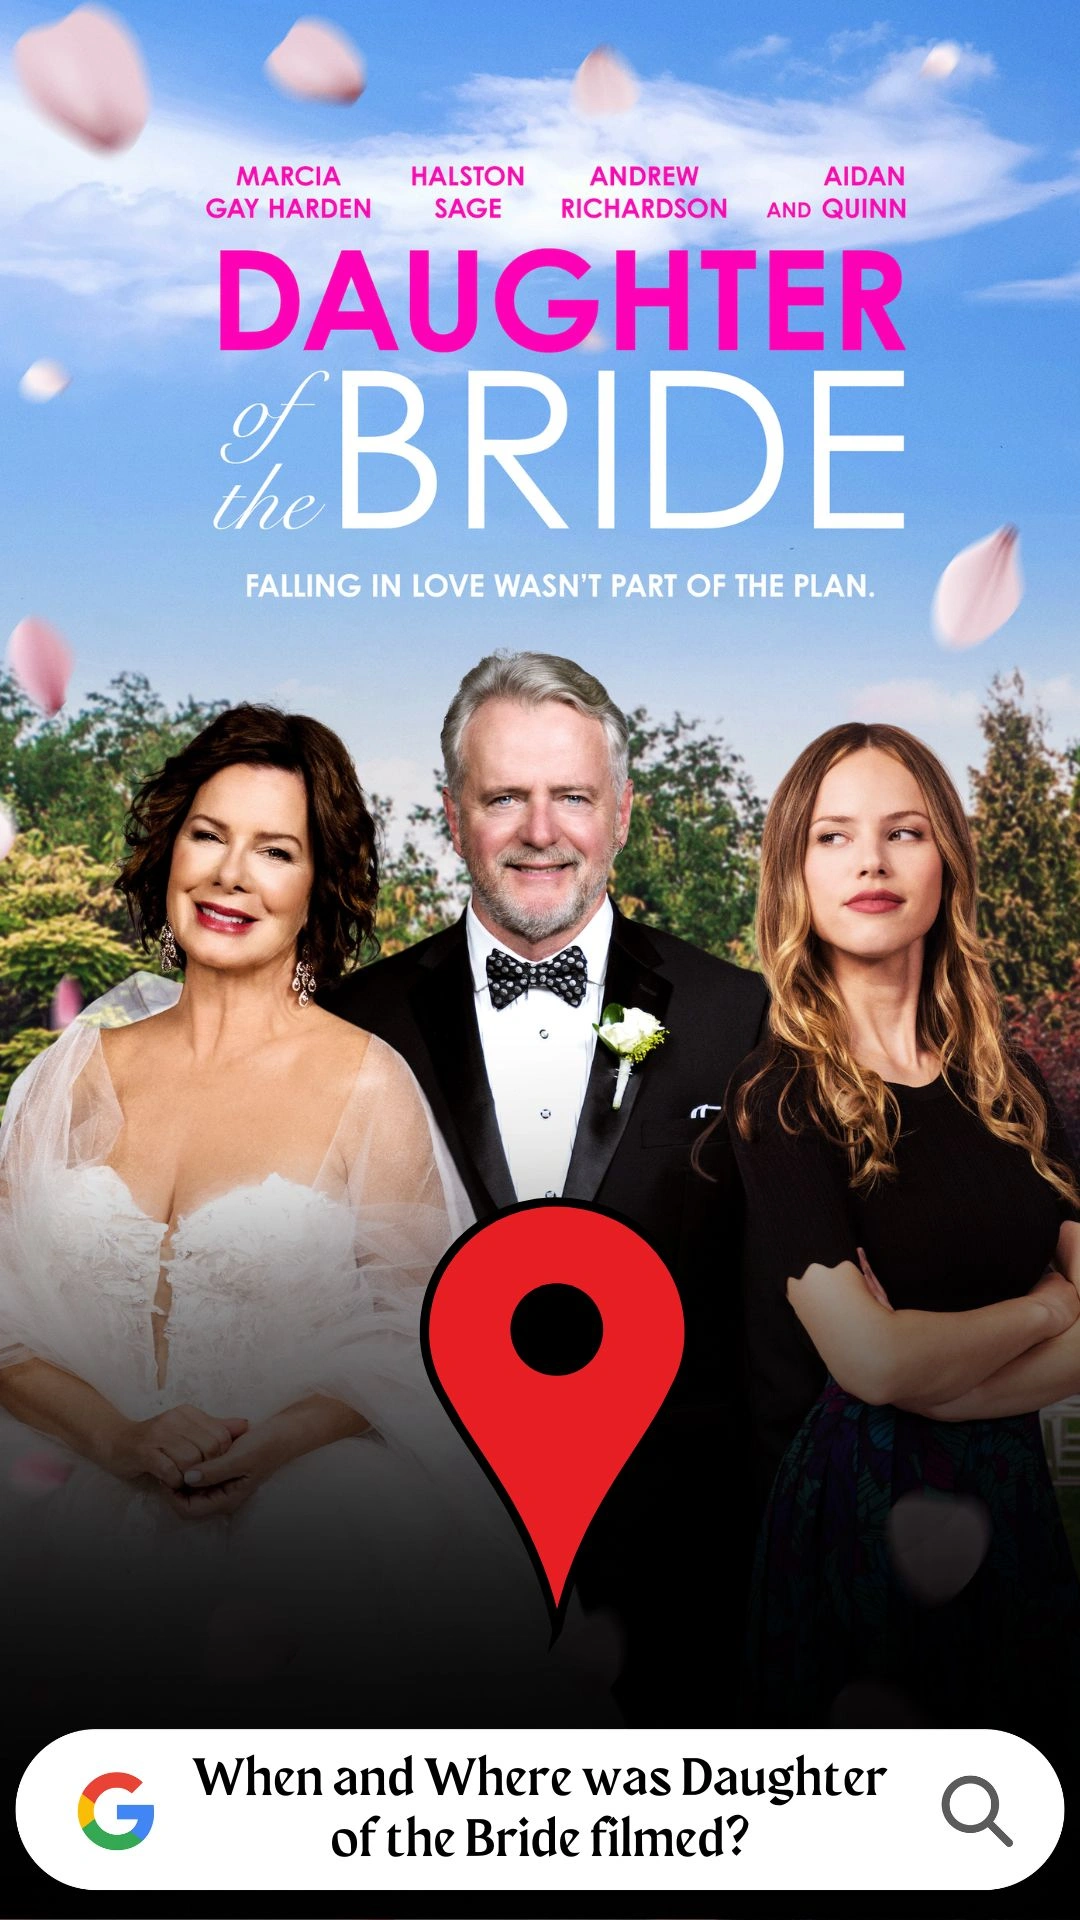 Daughter of the Bride Filming Locations